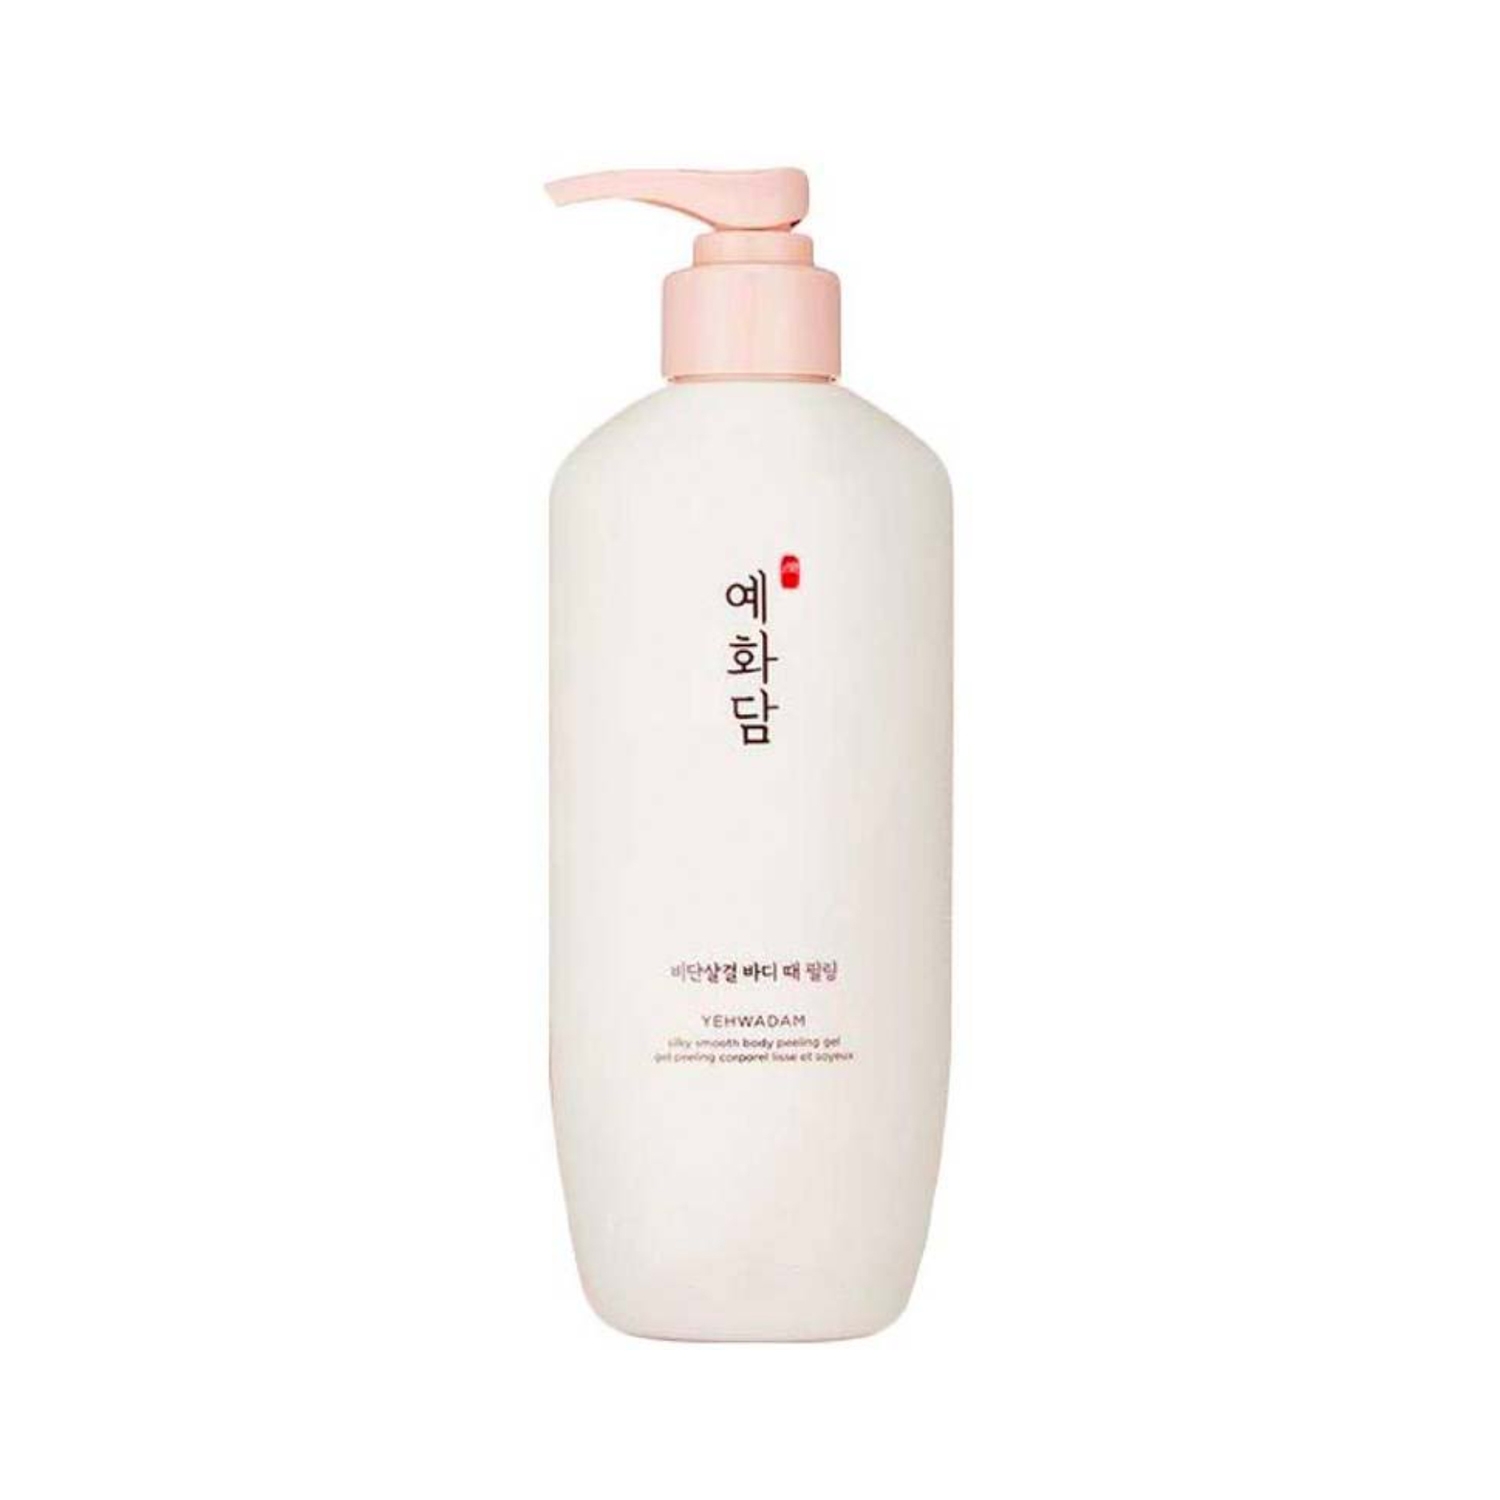 The Face Shop | The Face Shop Yehwadam Silky Smooth Body Peeling Gel (300ml)